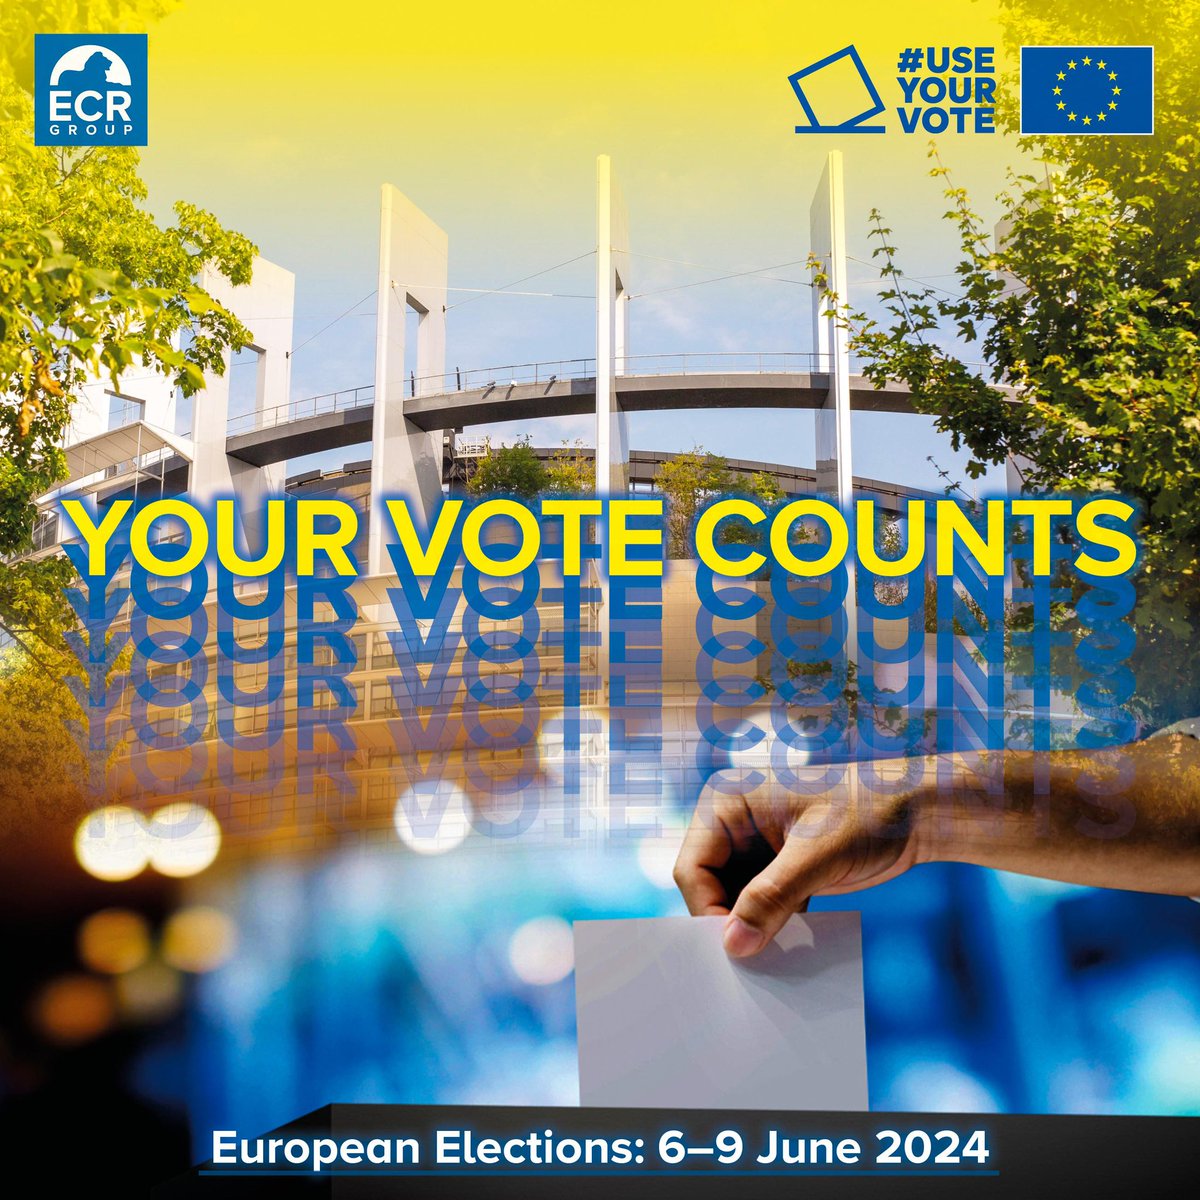 🗳️ You have the chance to make an impact on how things work in #Brussels and an effect on matters across the EU. The 🇪🇺 #EuropeanElections are taking place — 6-9 June 🇪🇺 Make sure you’re registered and #UseYourVote! Learn how: elections.europa.eu/en/how-to-vote/